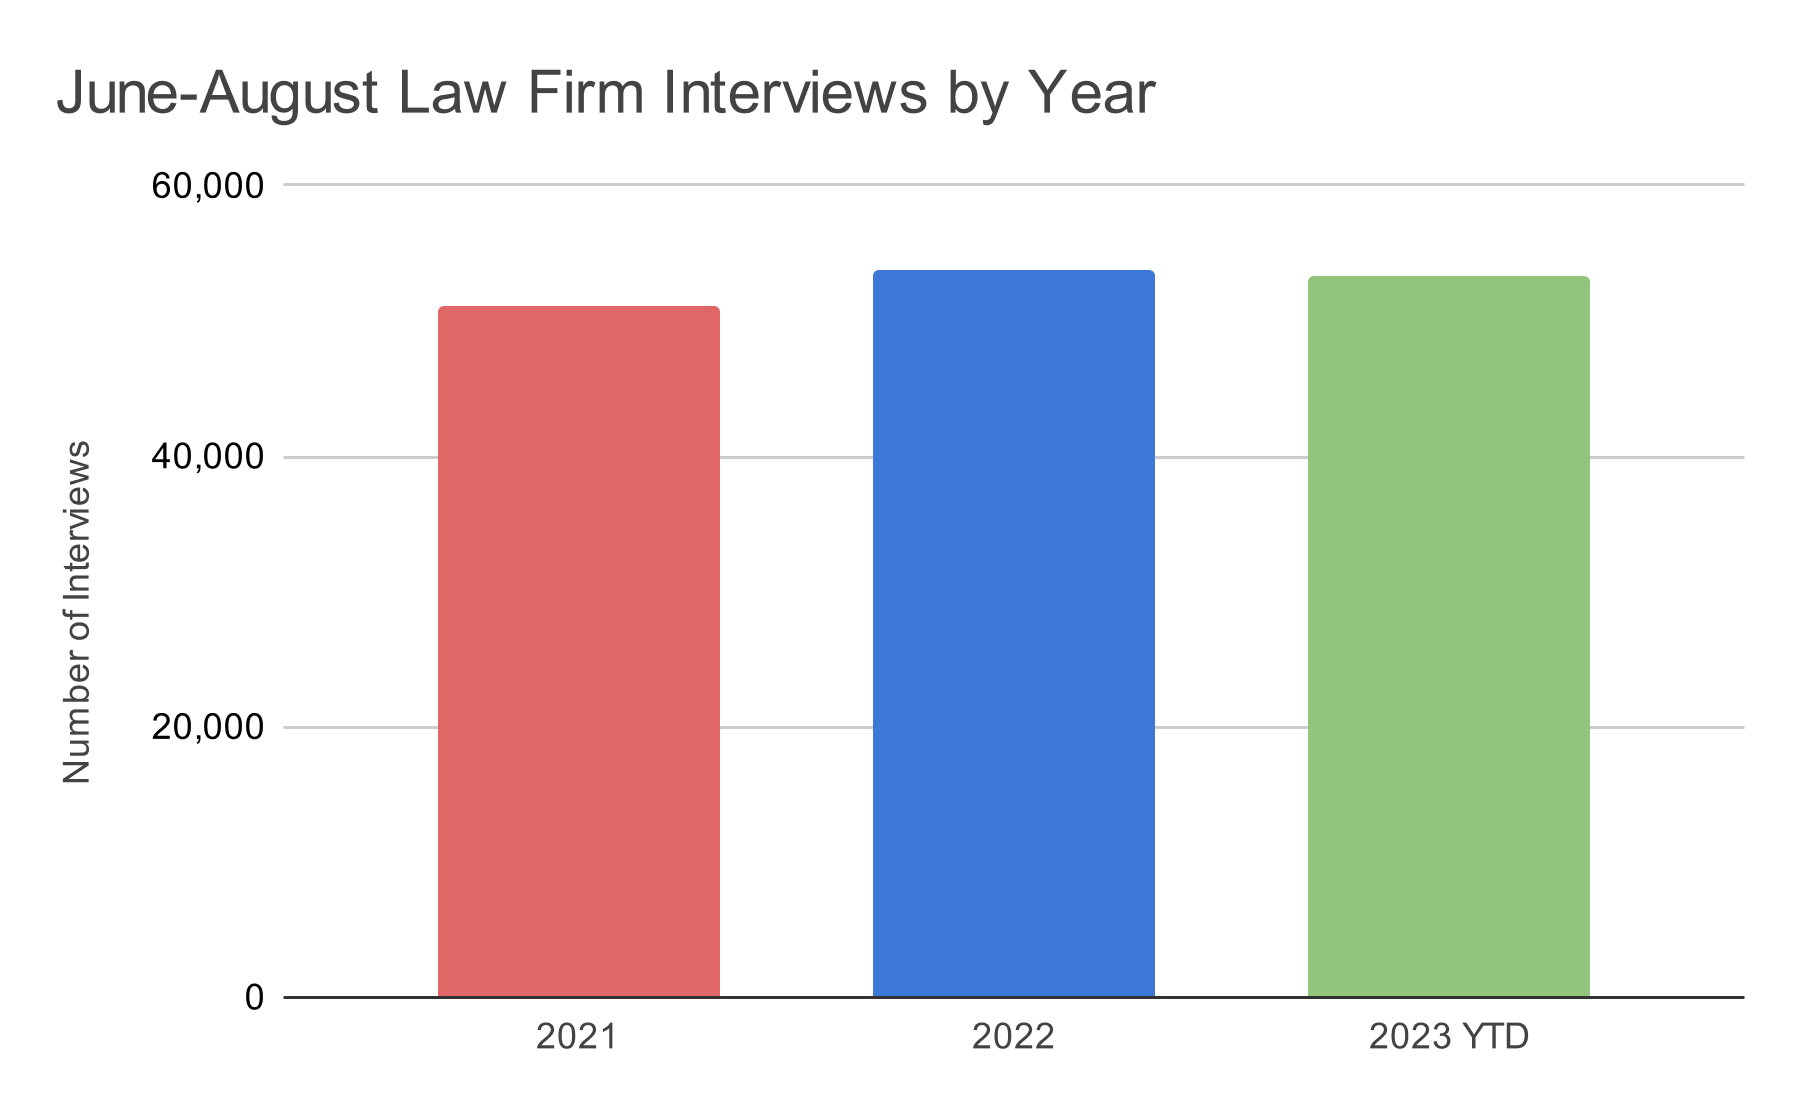 June-August Law Firm Interviews by Year